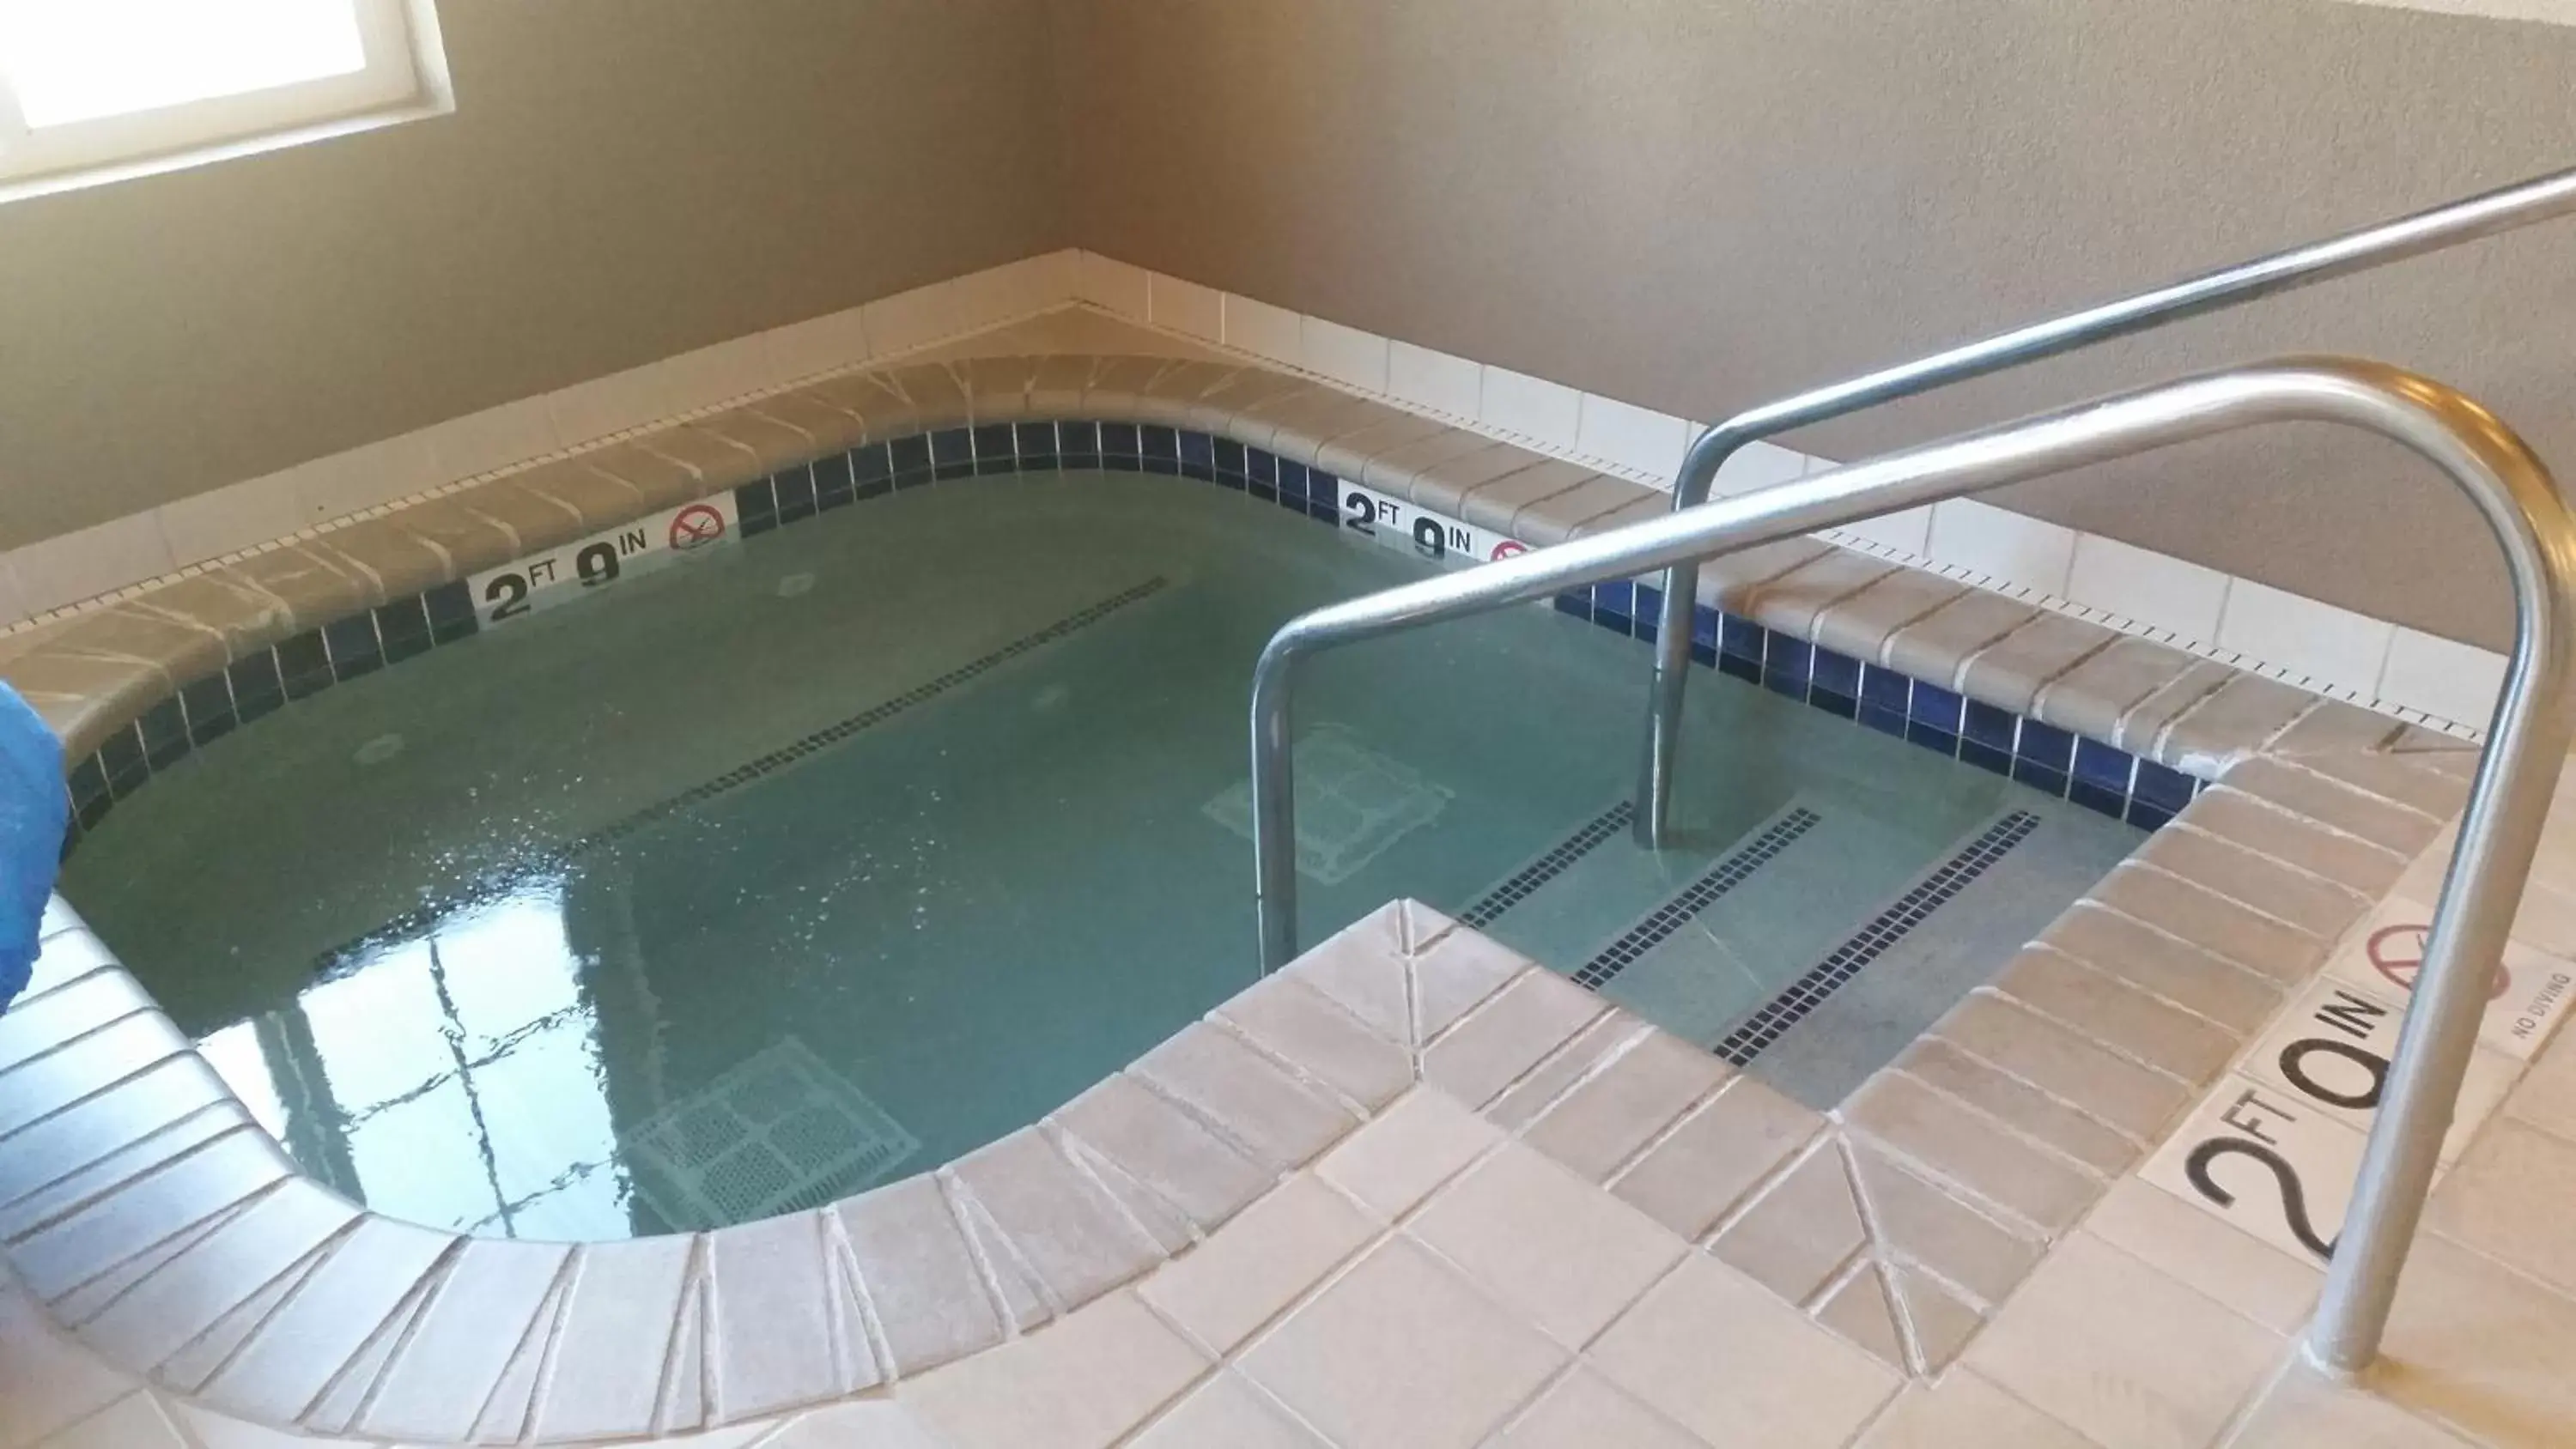 Swimming Pool in GrandStay Residential Suites Hotel - Eau Claire